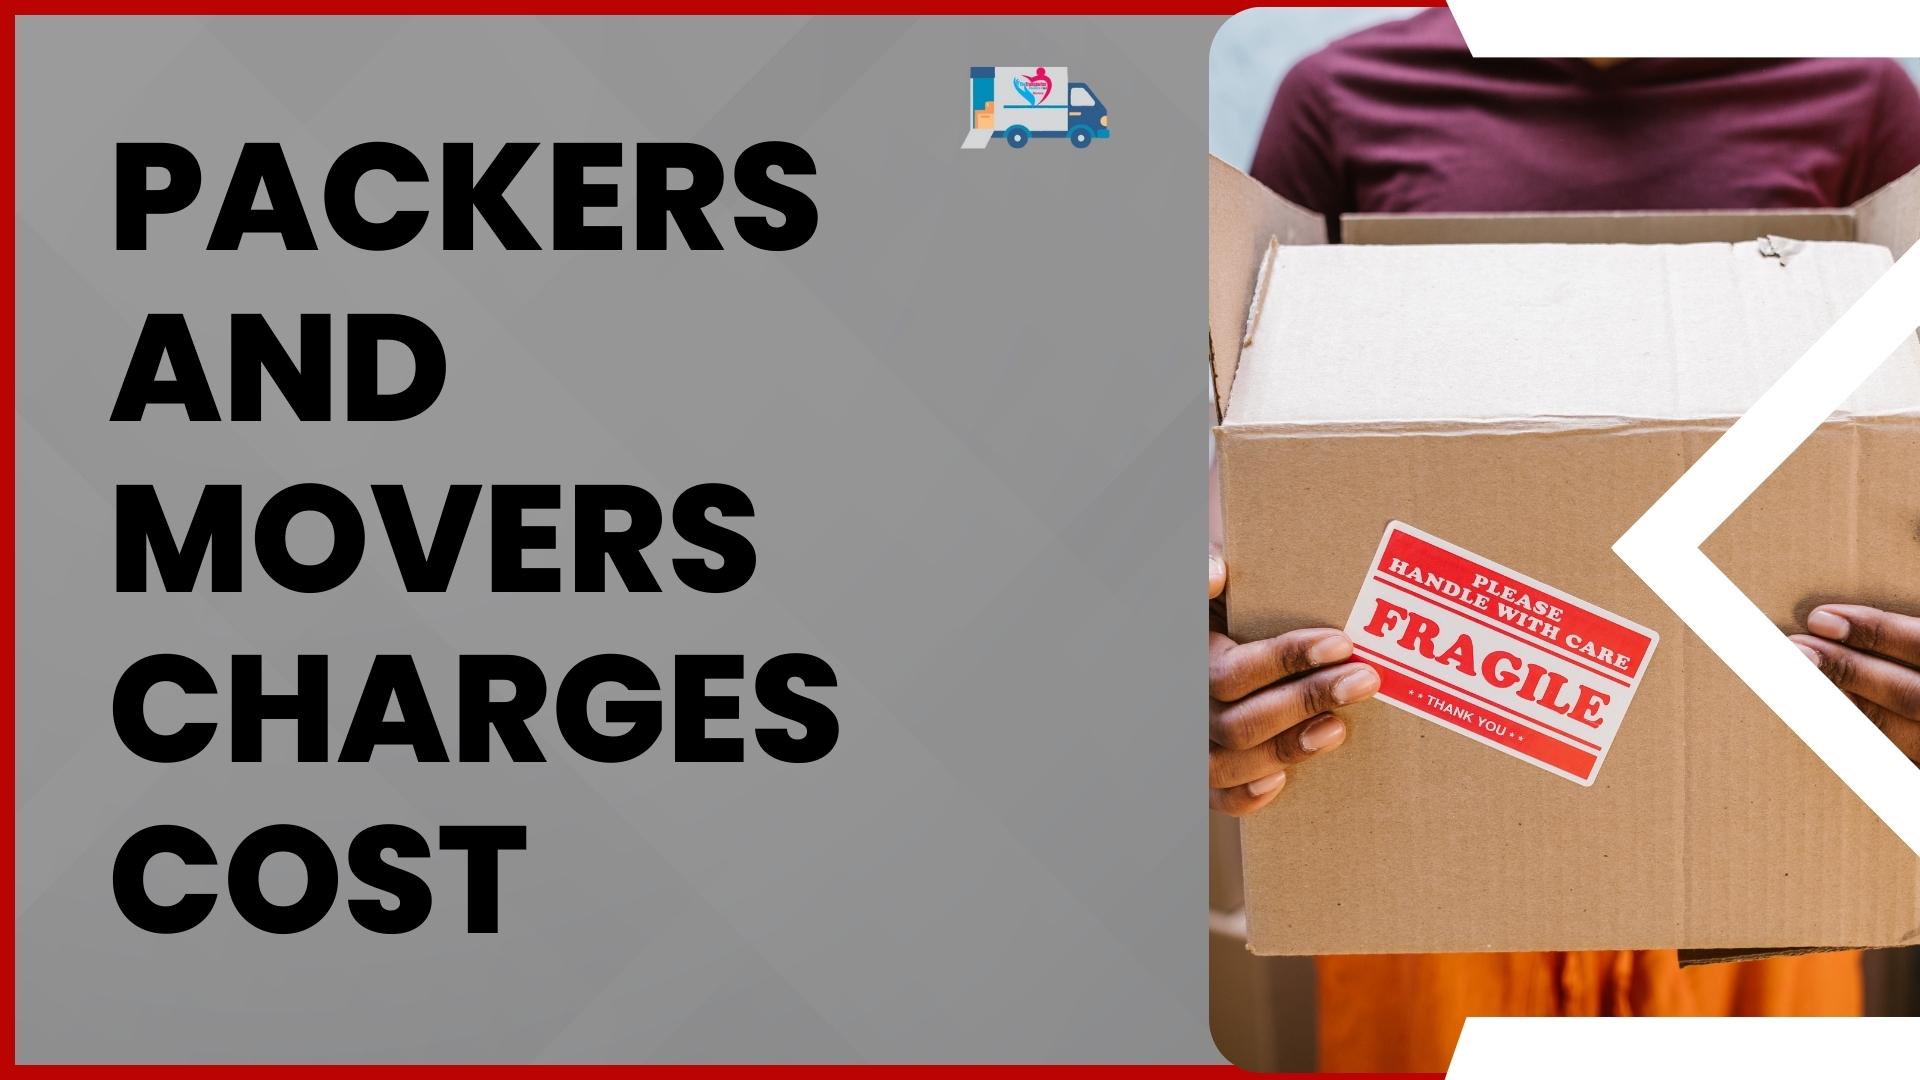 Packers and Movers offers competitive movers and packers Vijayawada rates and excellent services